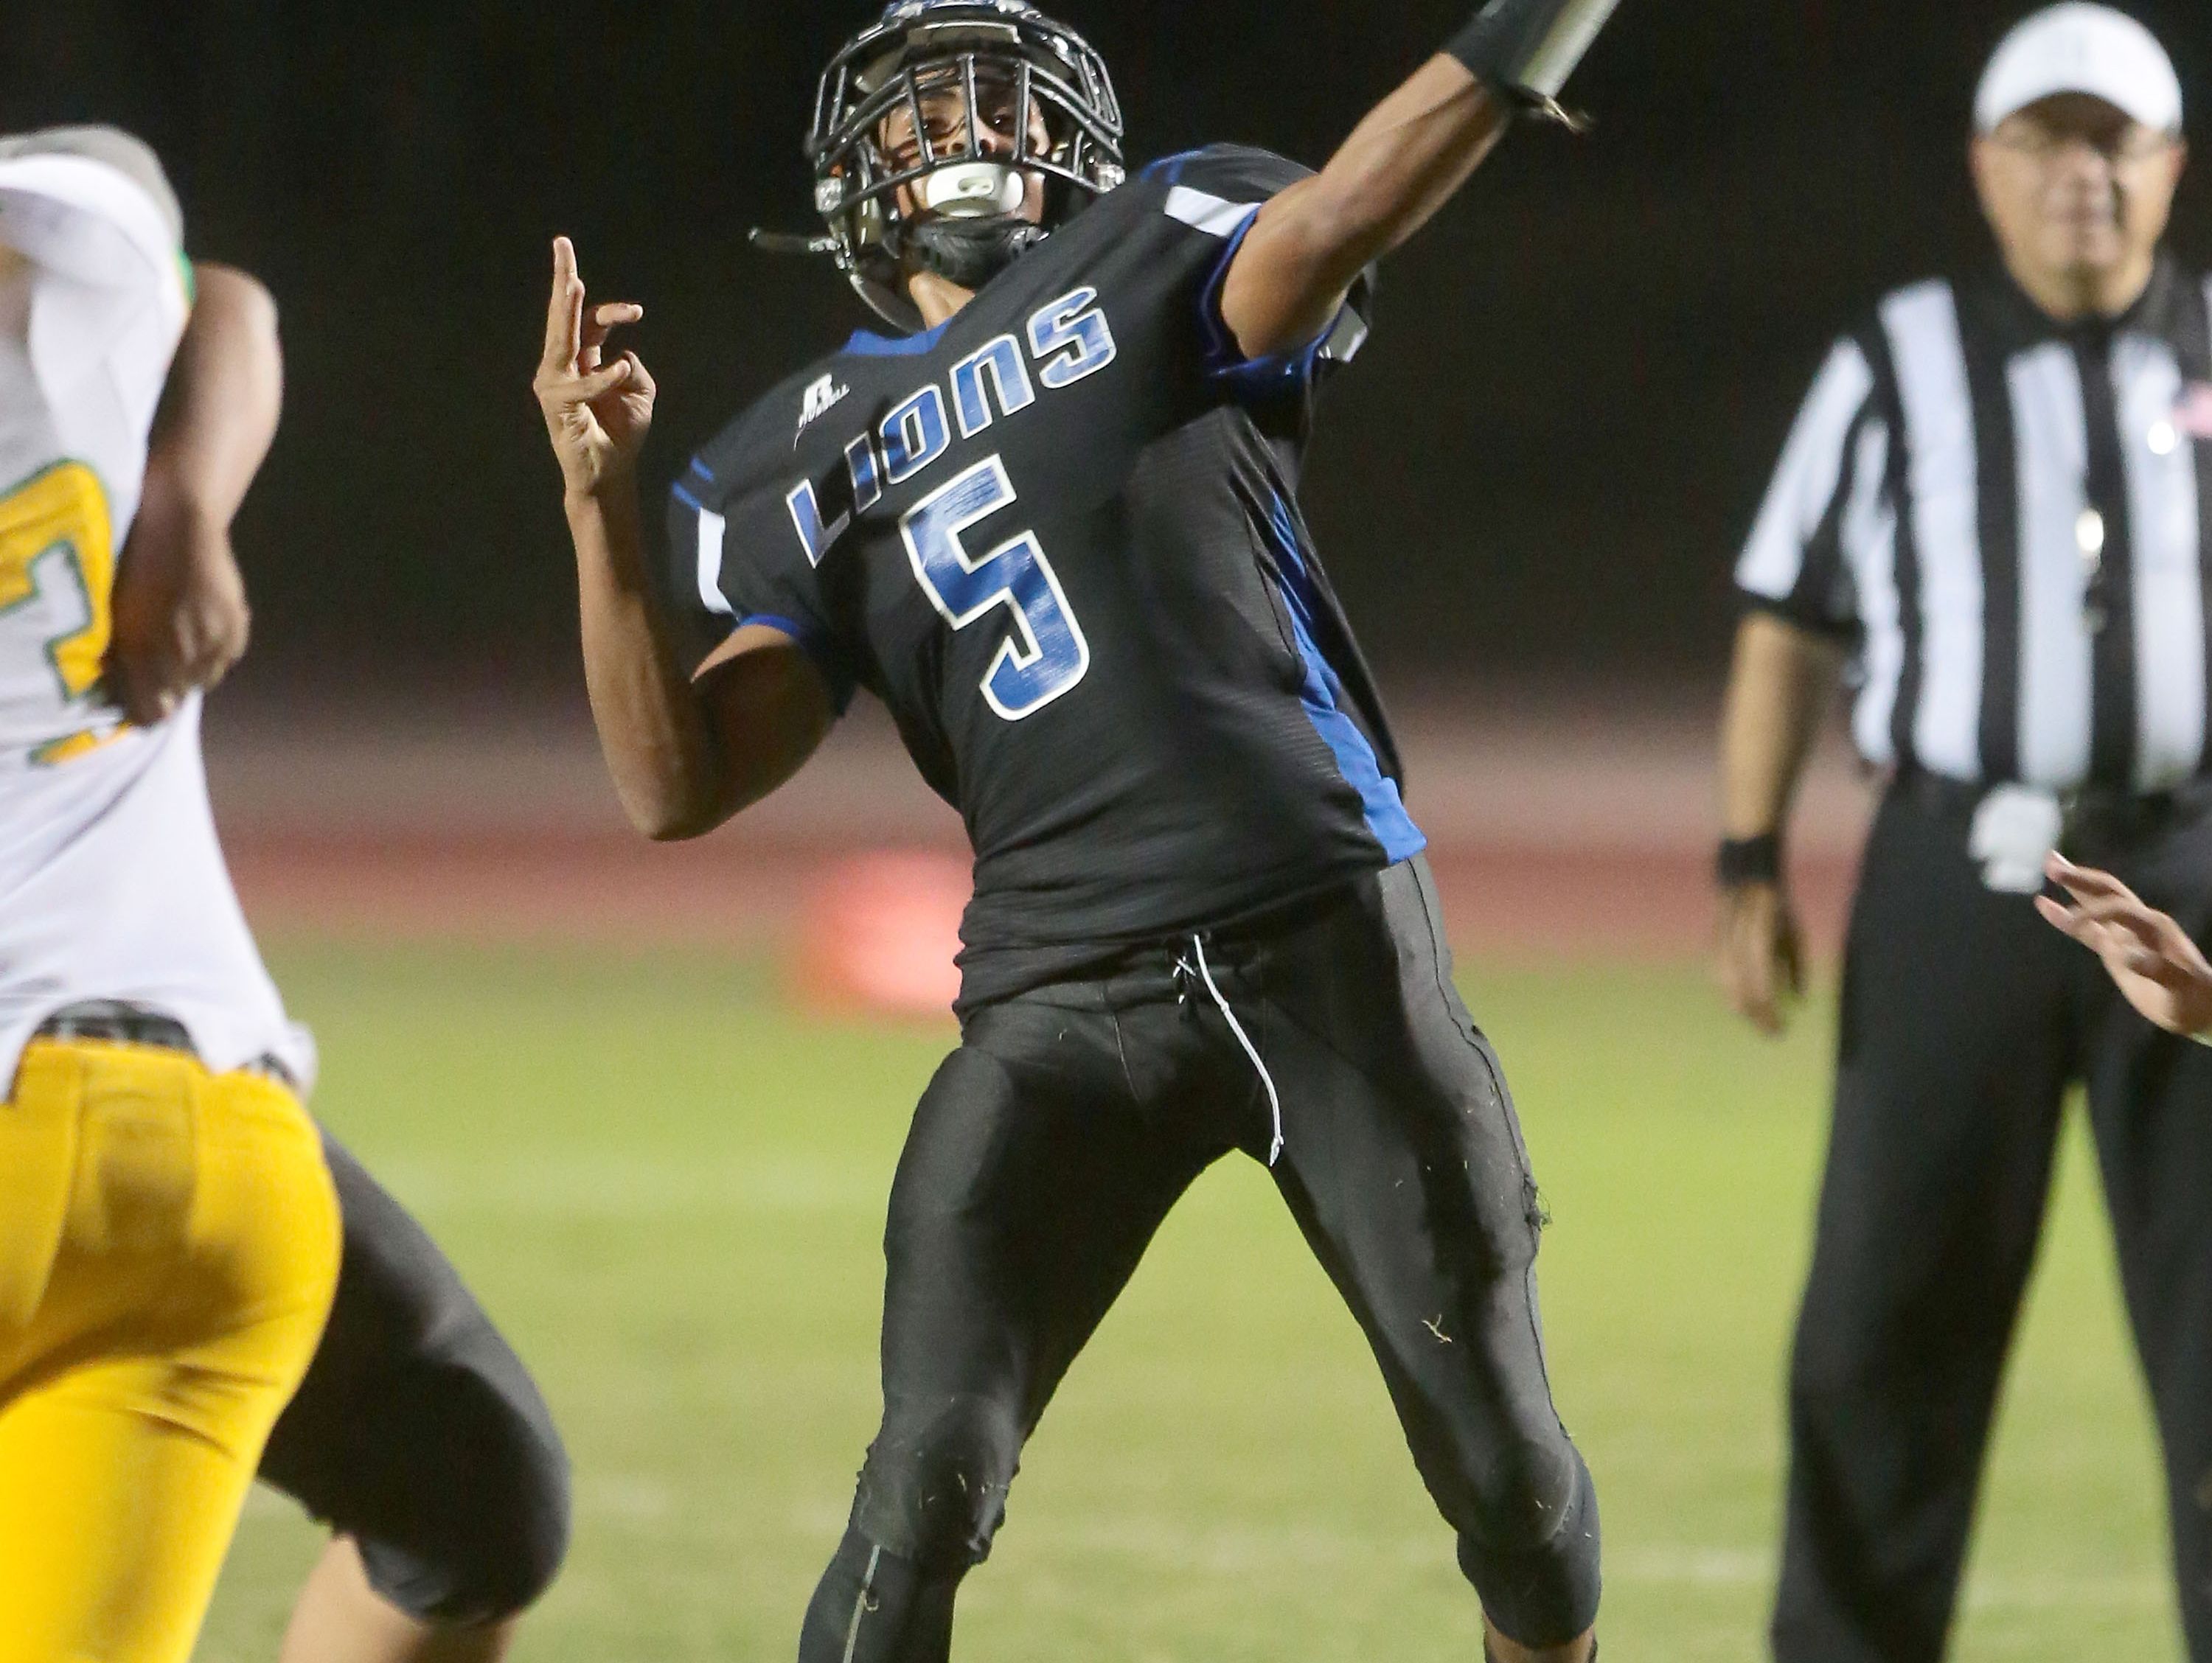 Cathedral City quarterback Jordan Wallace throws against Coachella Valley, August 26, 2016.